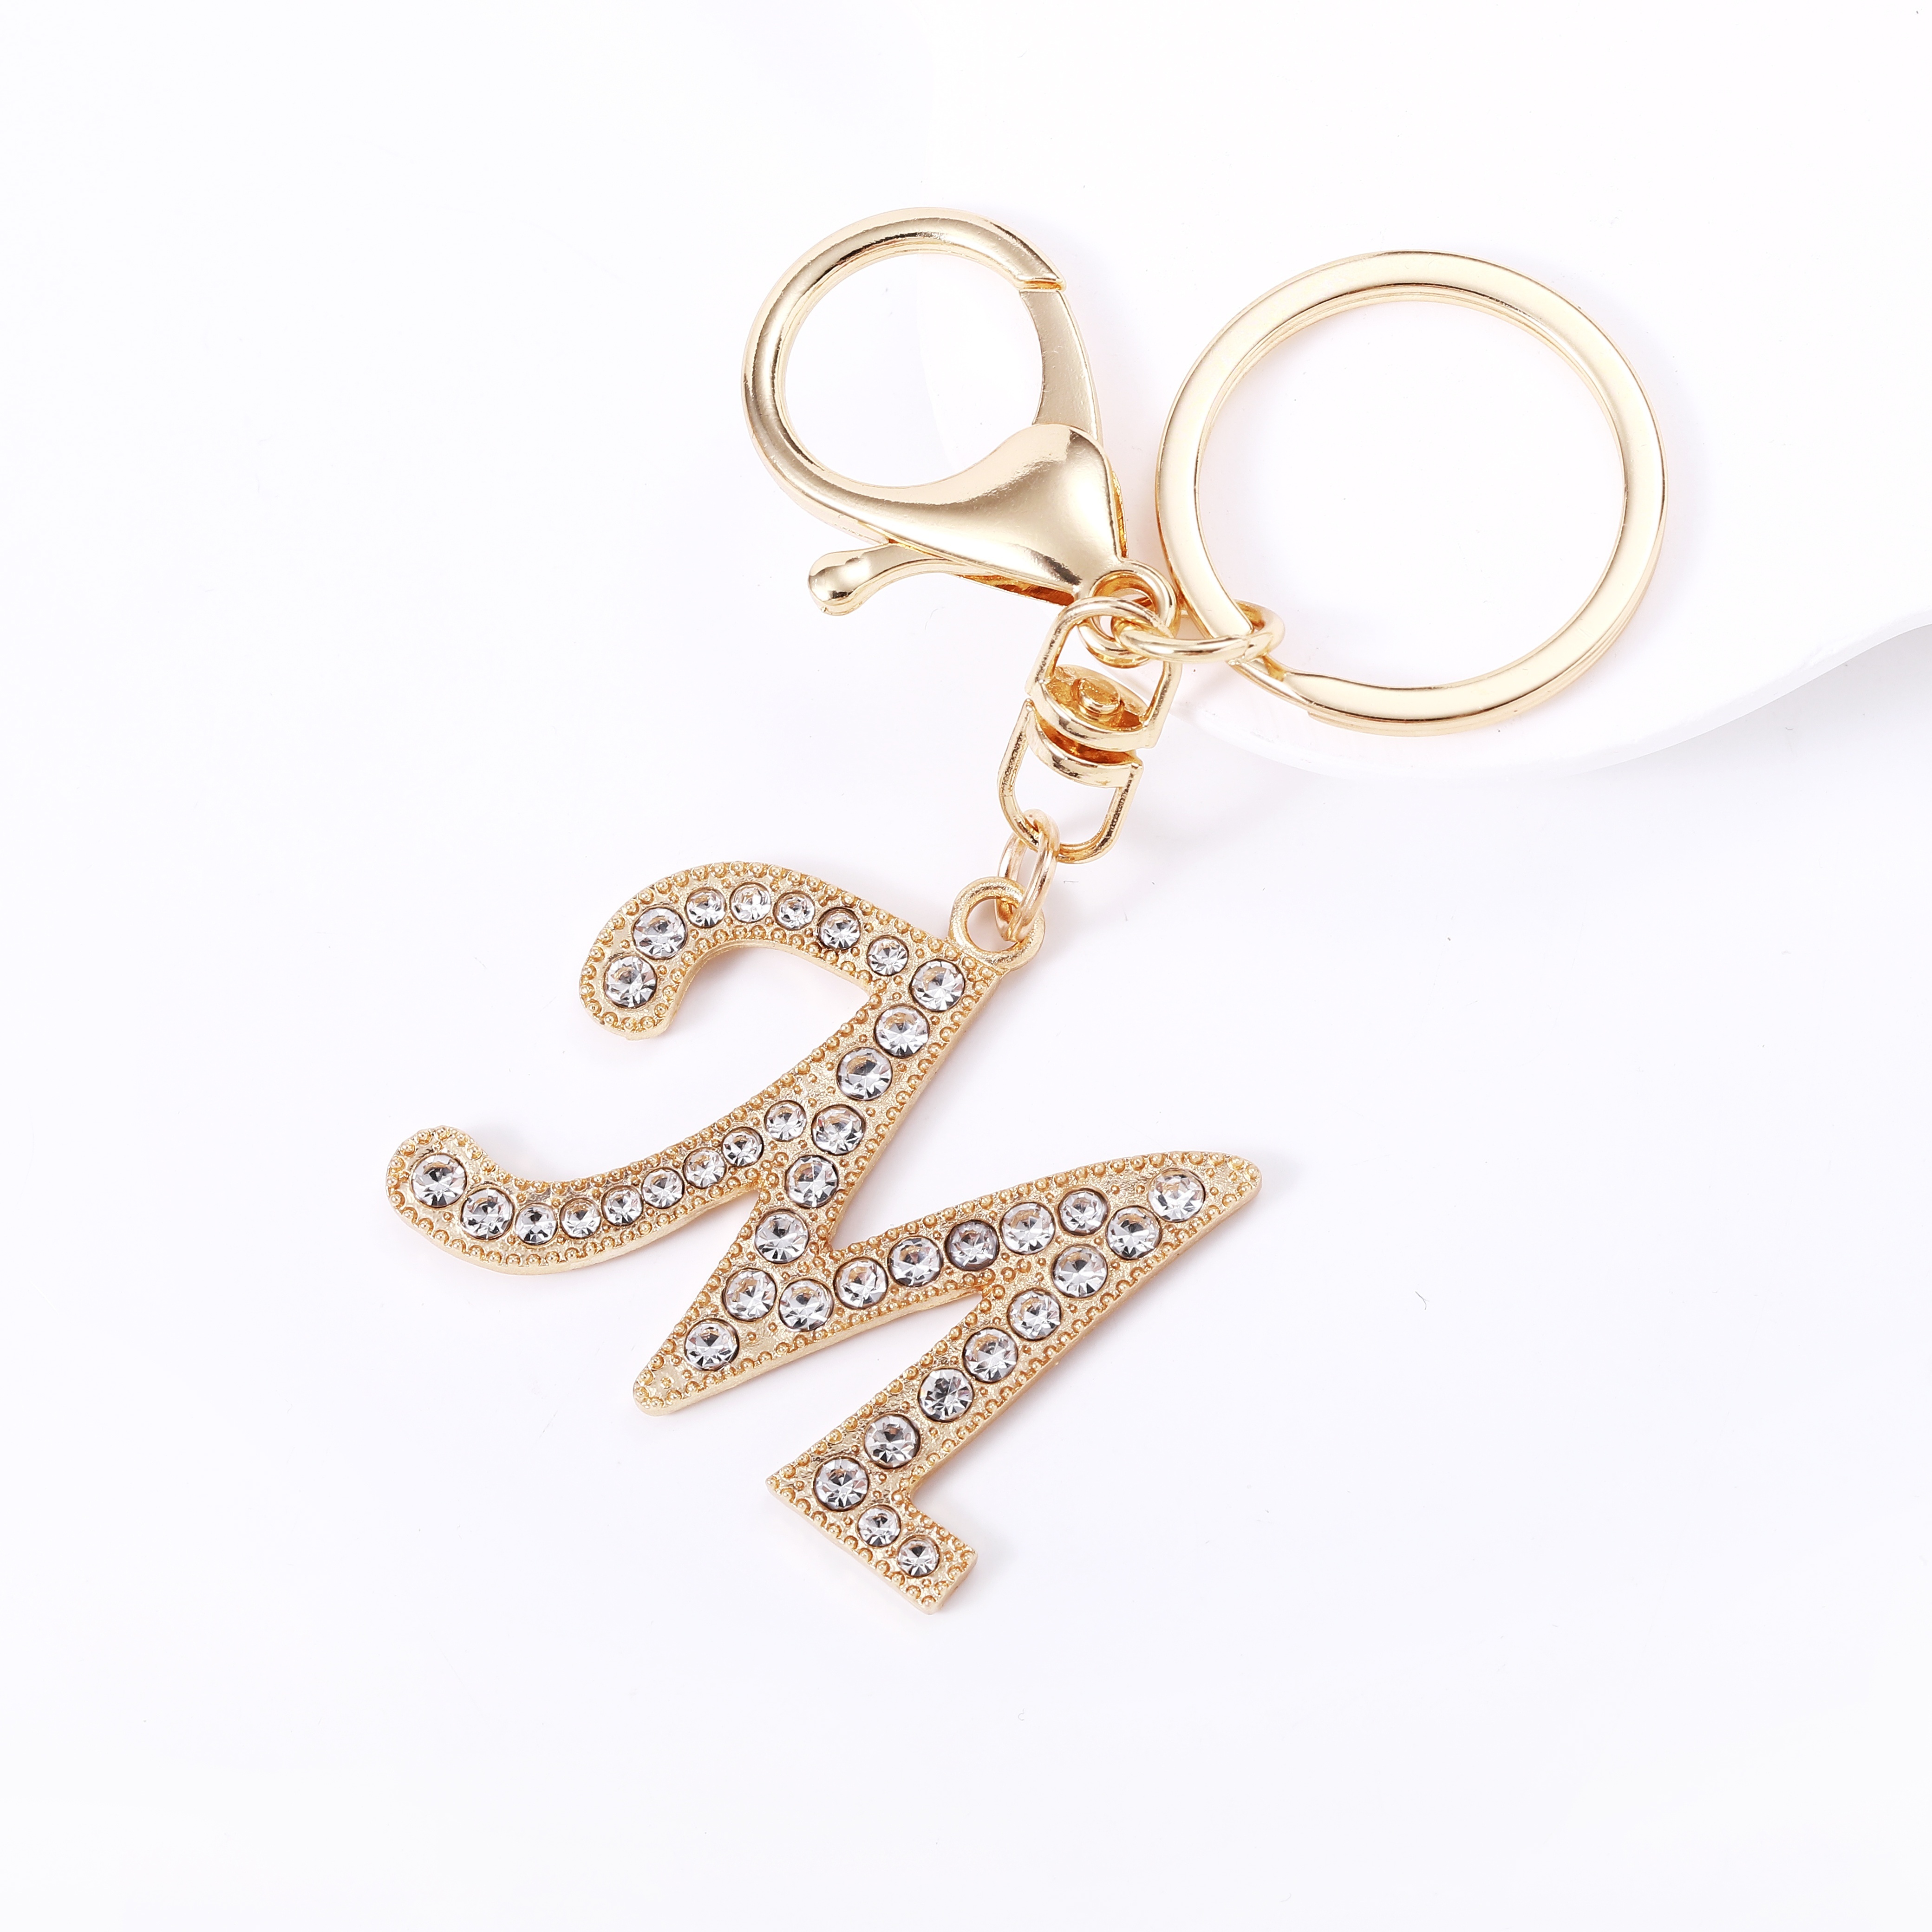 JINGUAZI Backpack Keychains Gifts for Women Initial Letter Keychain for Cute Car Key White Pink Tassel Bling Crystal Shiny